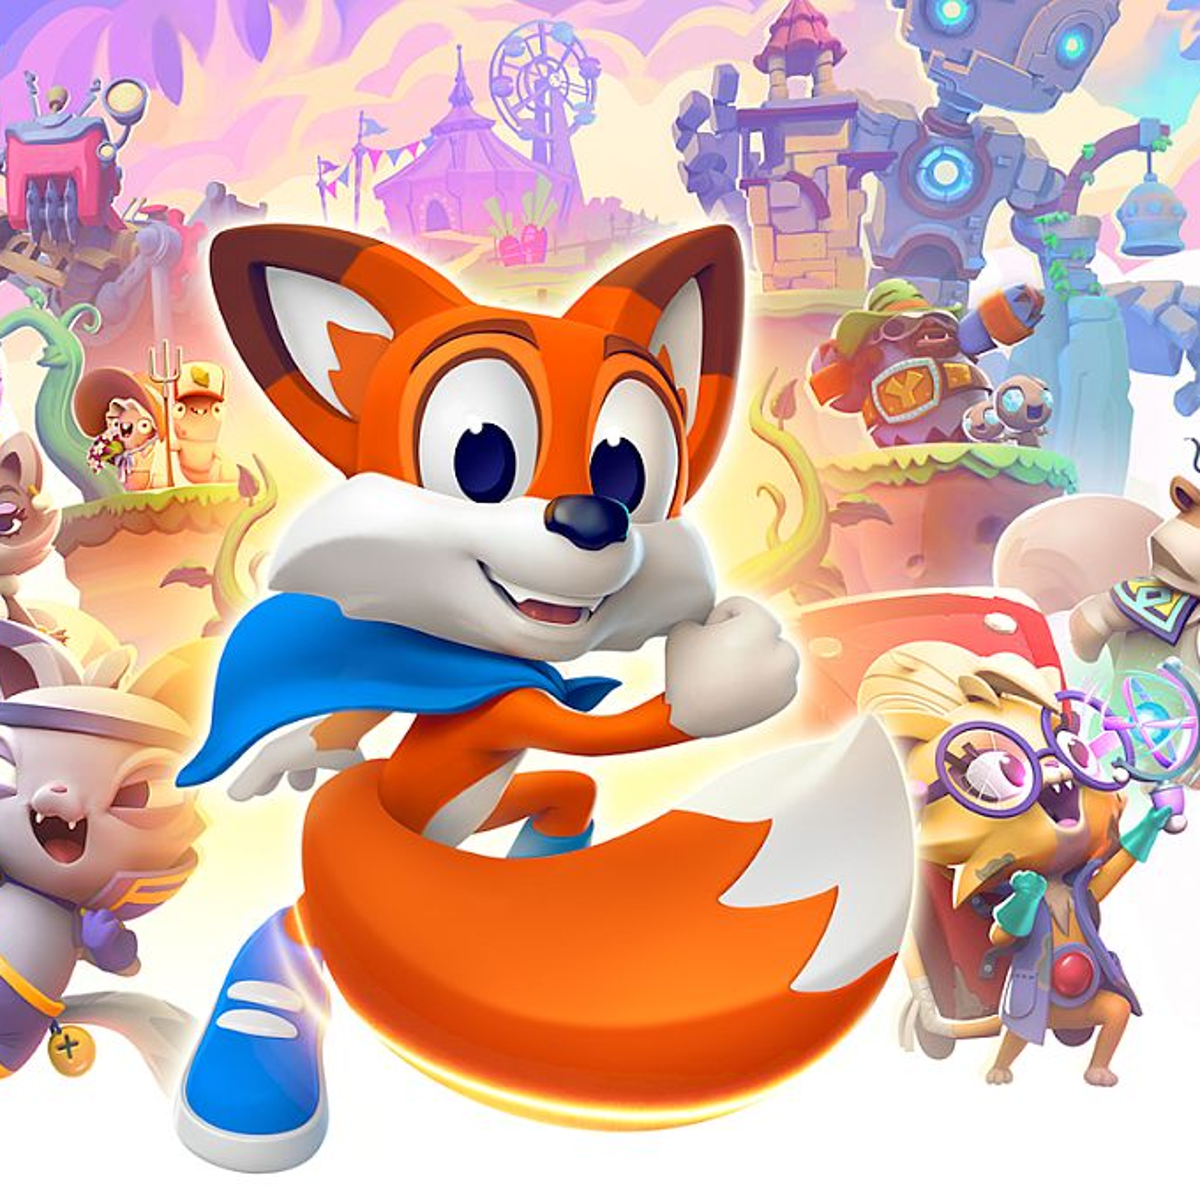 New lucky tale. New super Lucky's Tale. New super Luckys Tale. New super Luckys Tale котовытоток. New super Lucky's Tale прохождение.